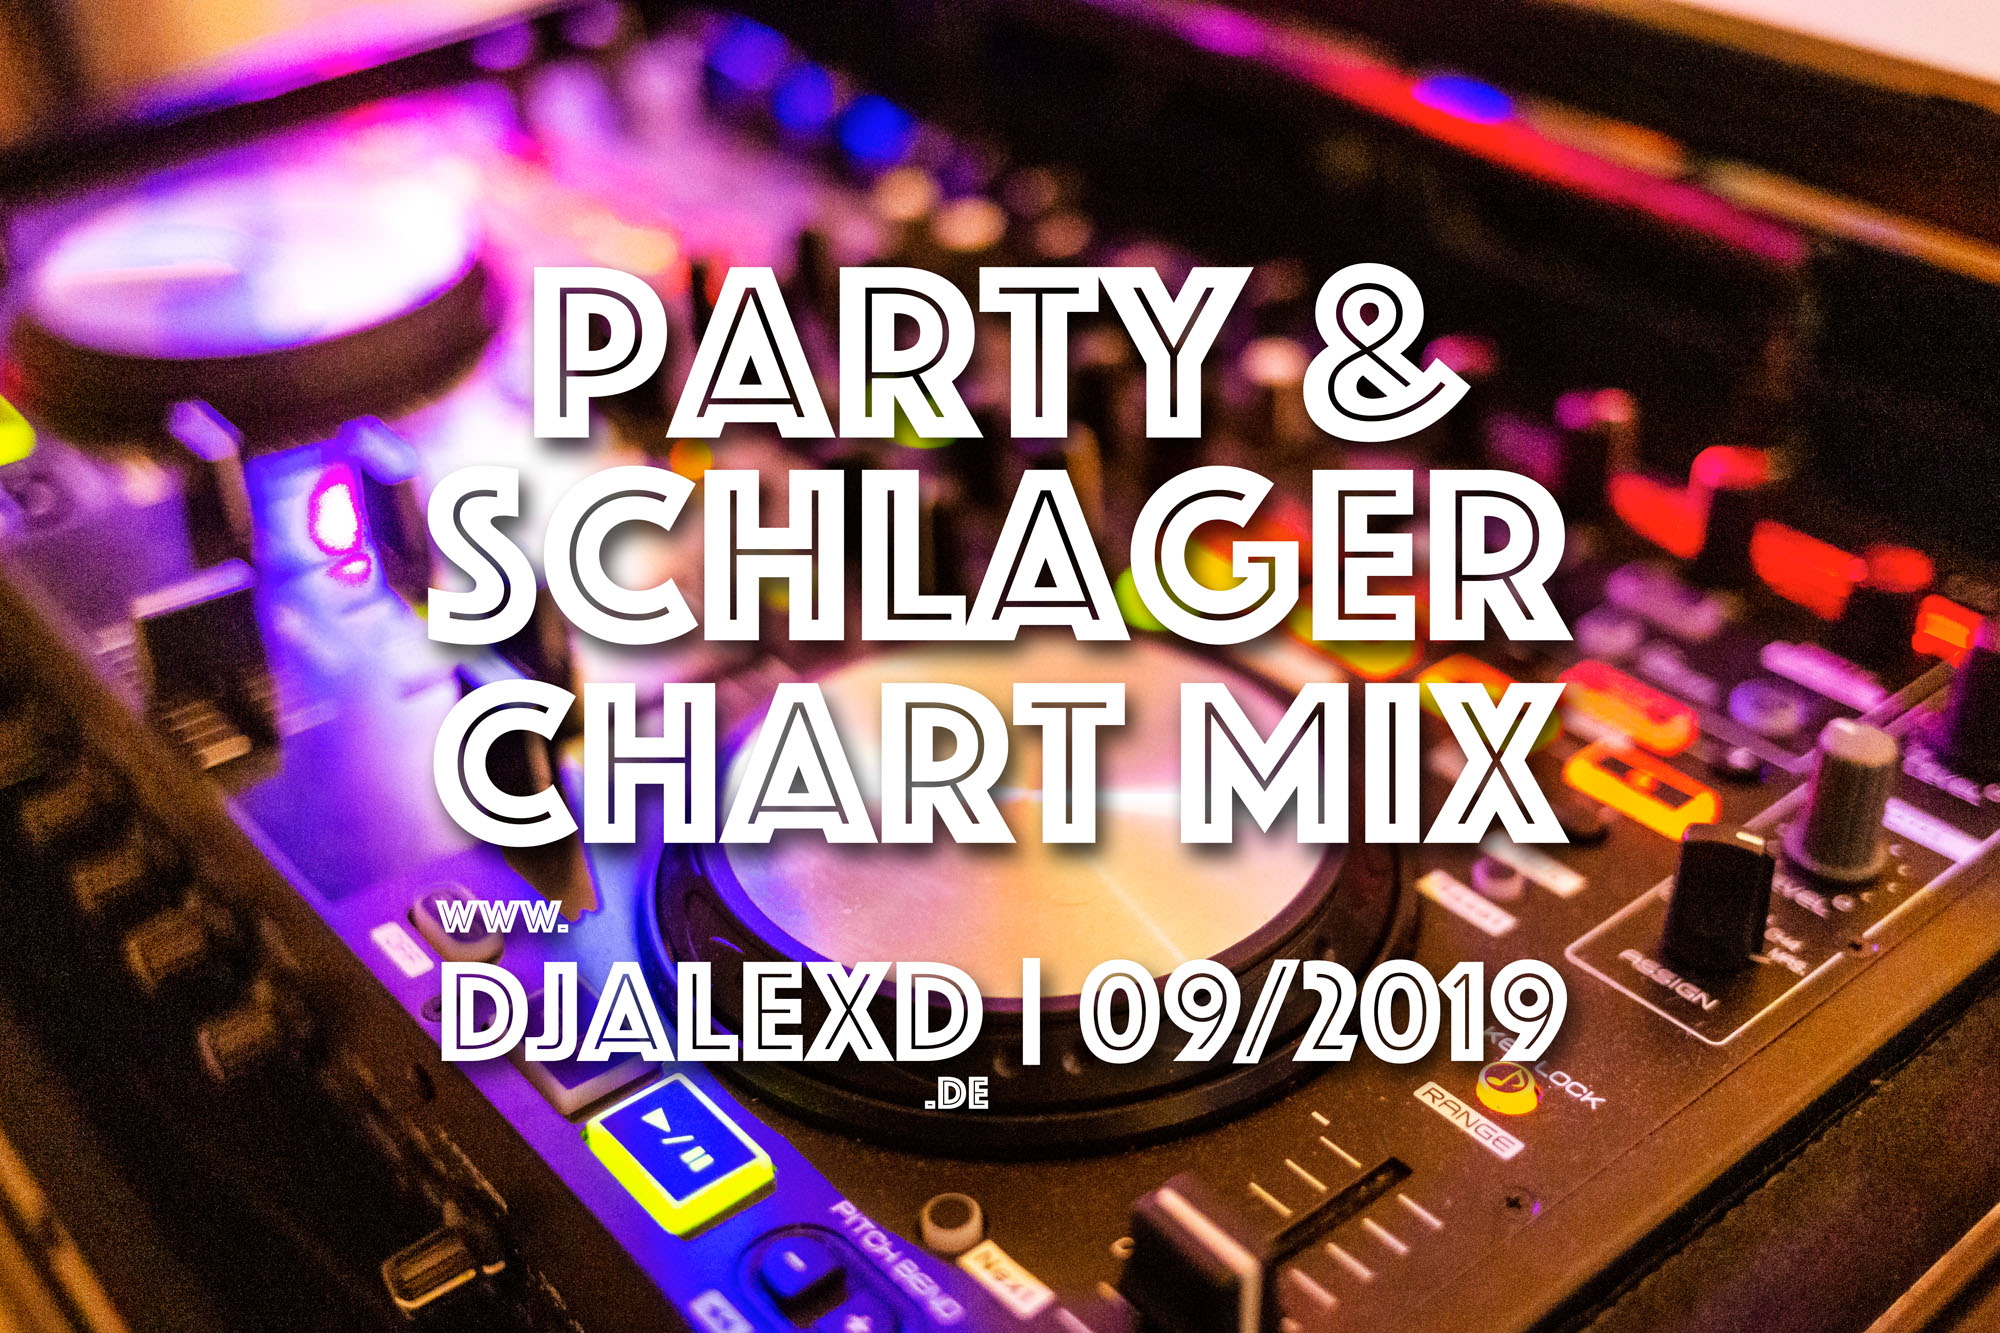 Party & Schlager Chart Mix 9/2019